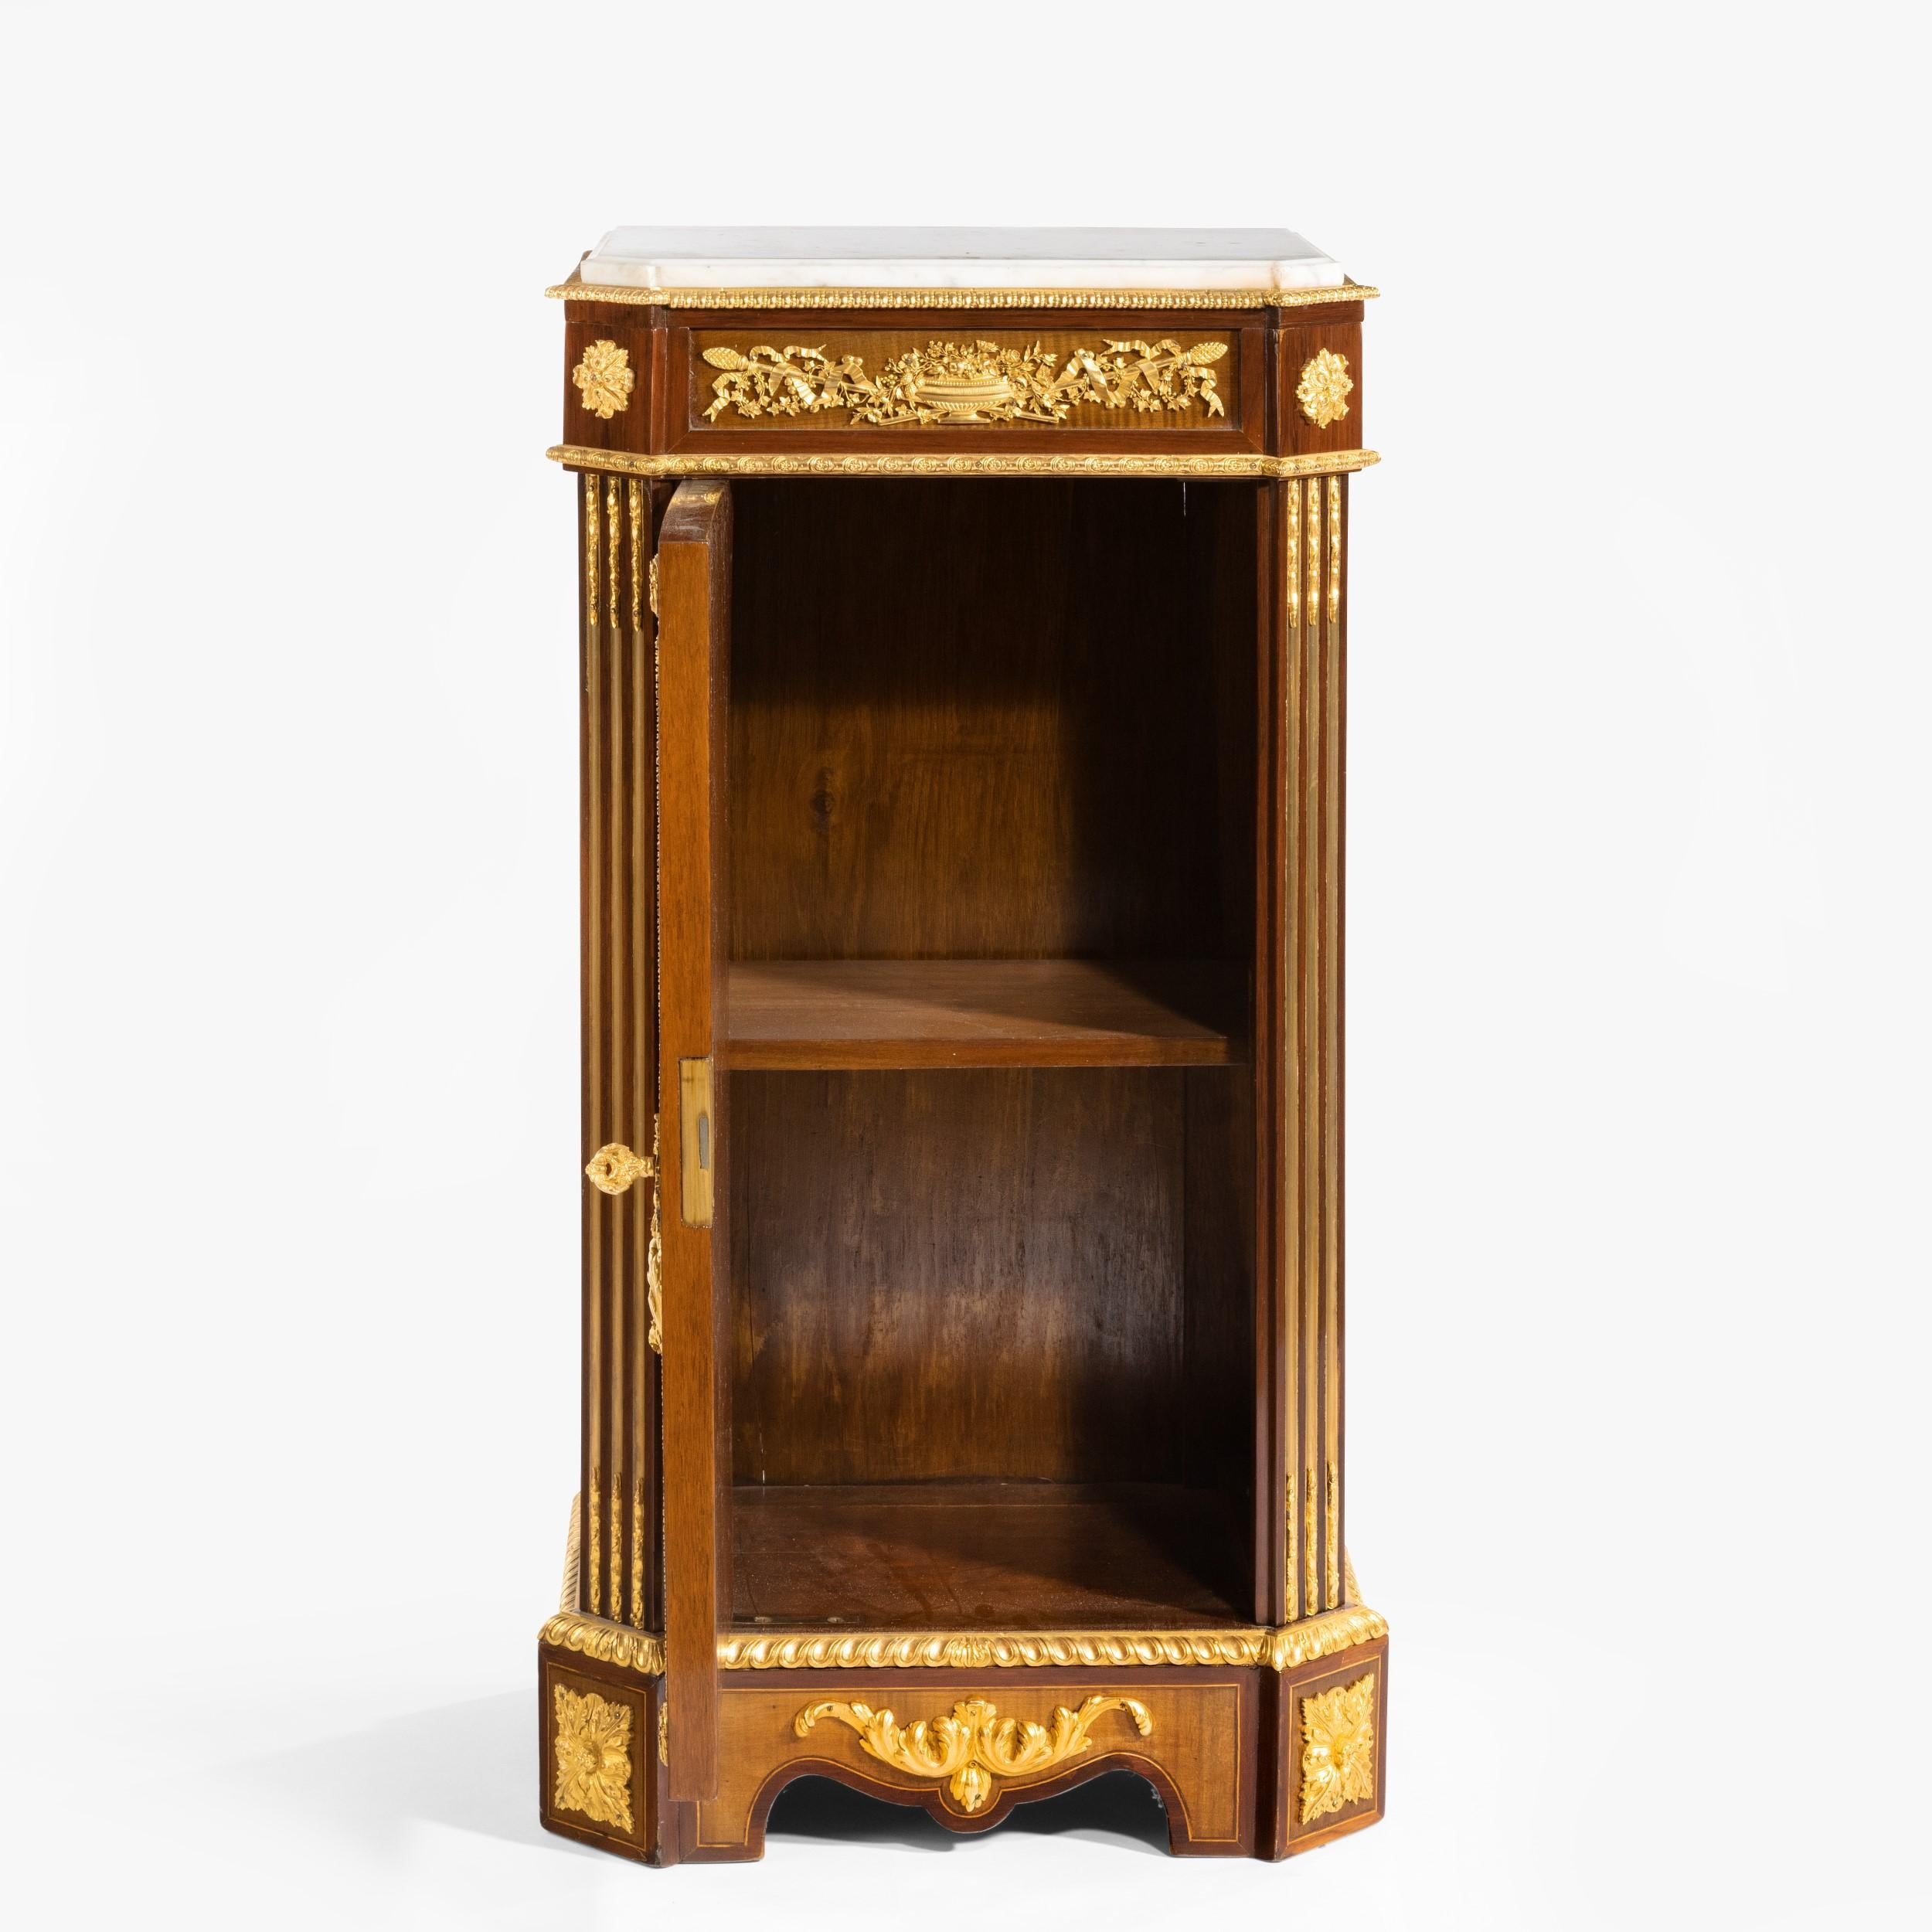 Bronze 19th Century French Pedestal Cabinet with Carrara Marble Top by Befort Jeune